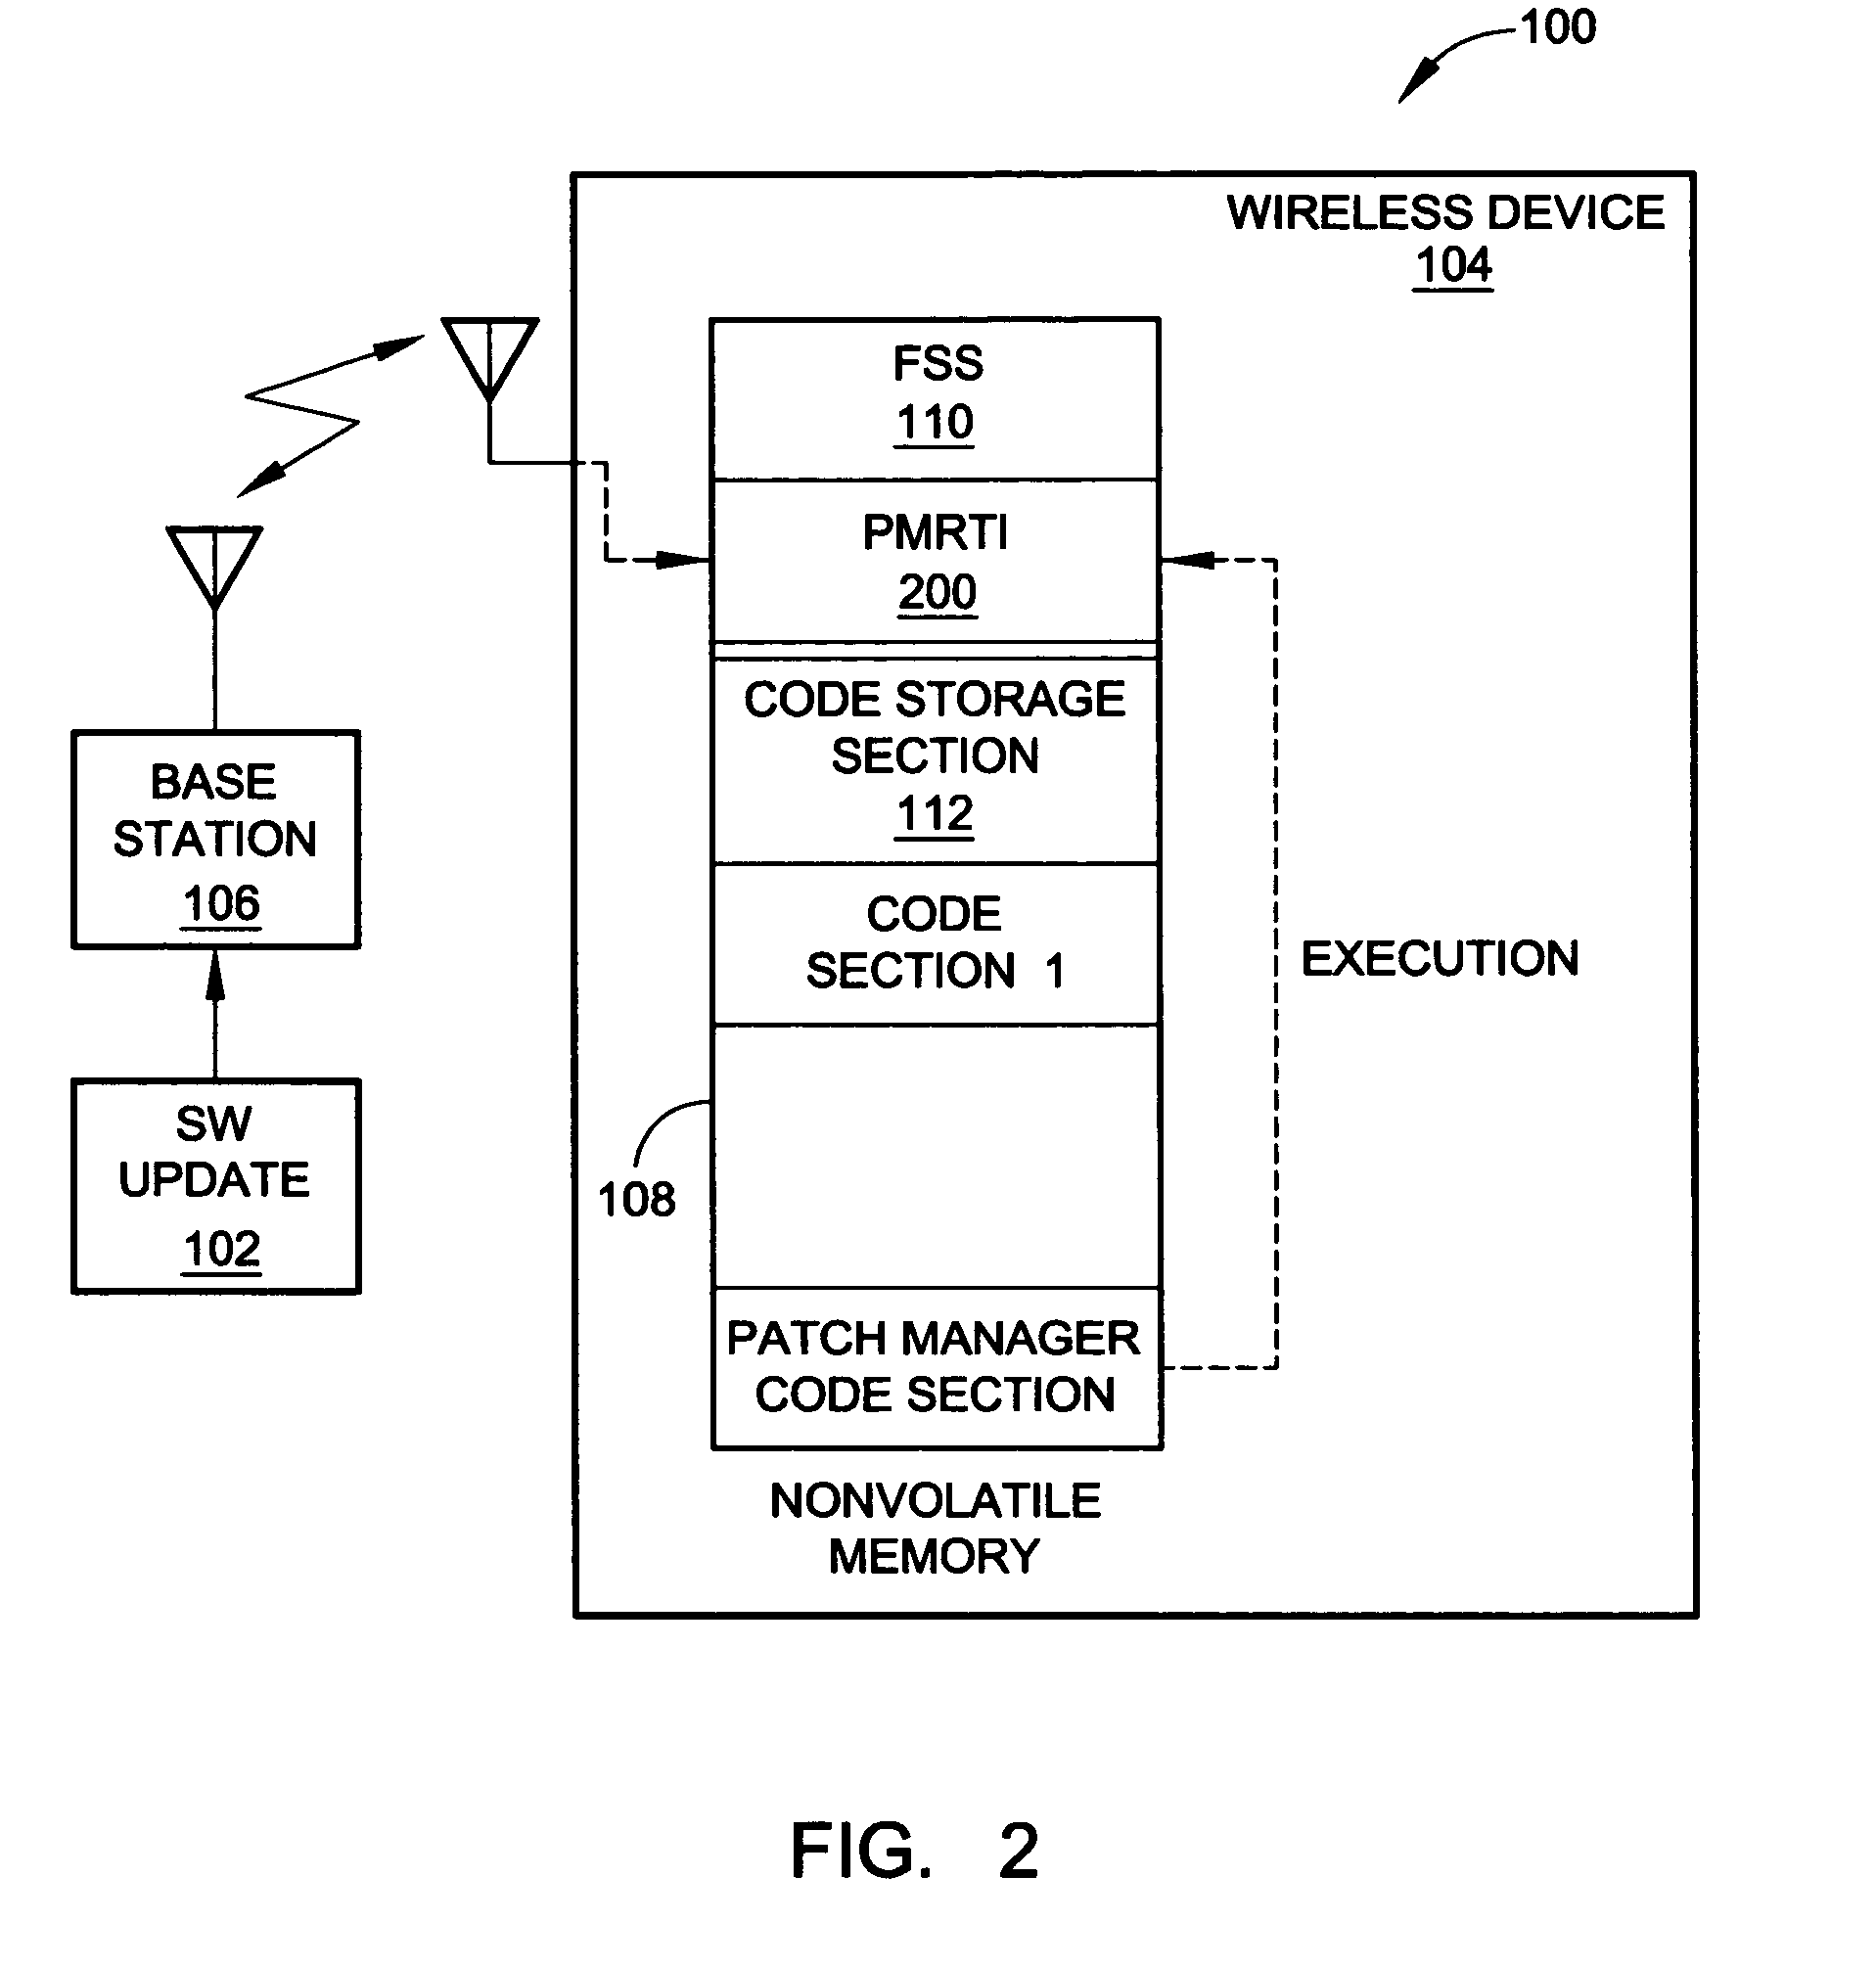 System and method for the management of wireless communications device system software downloads in the field